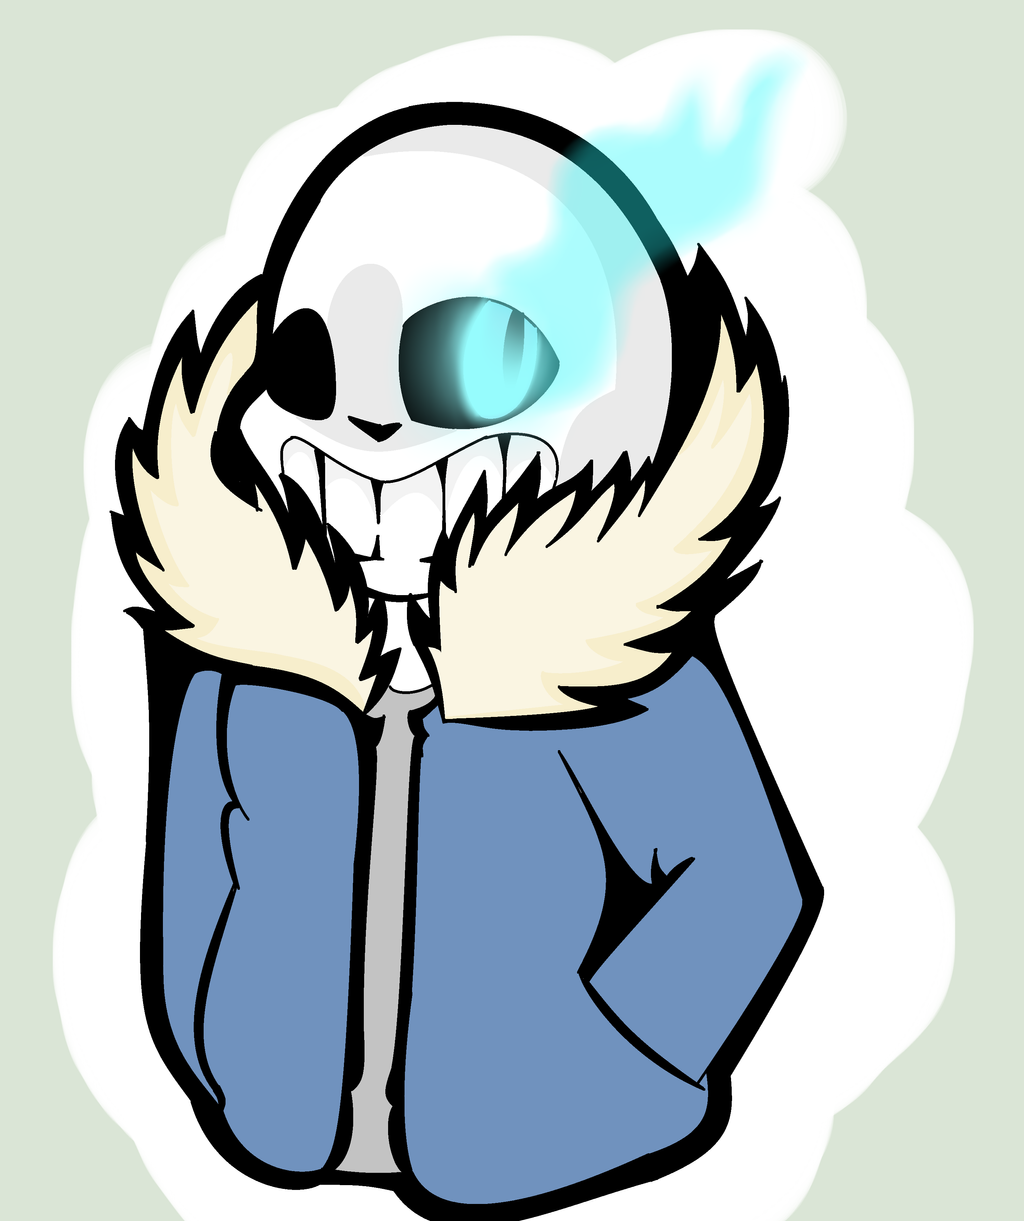 Gallery of Sans Pixel Art With Flaming Eye.